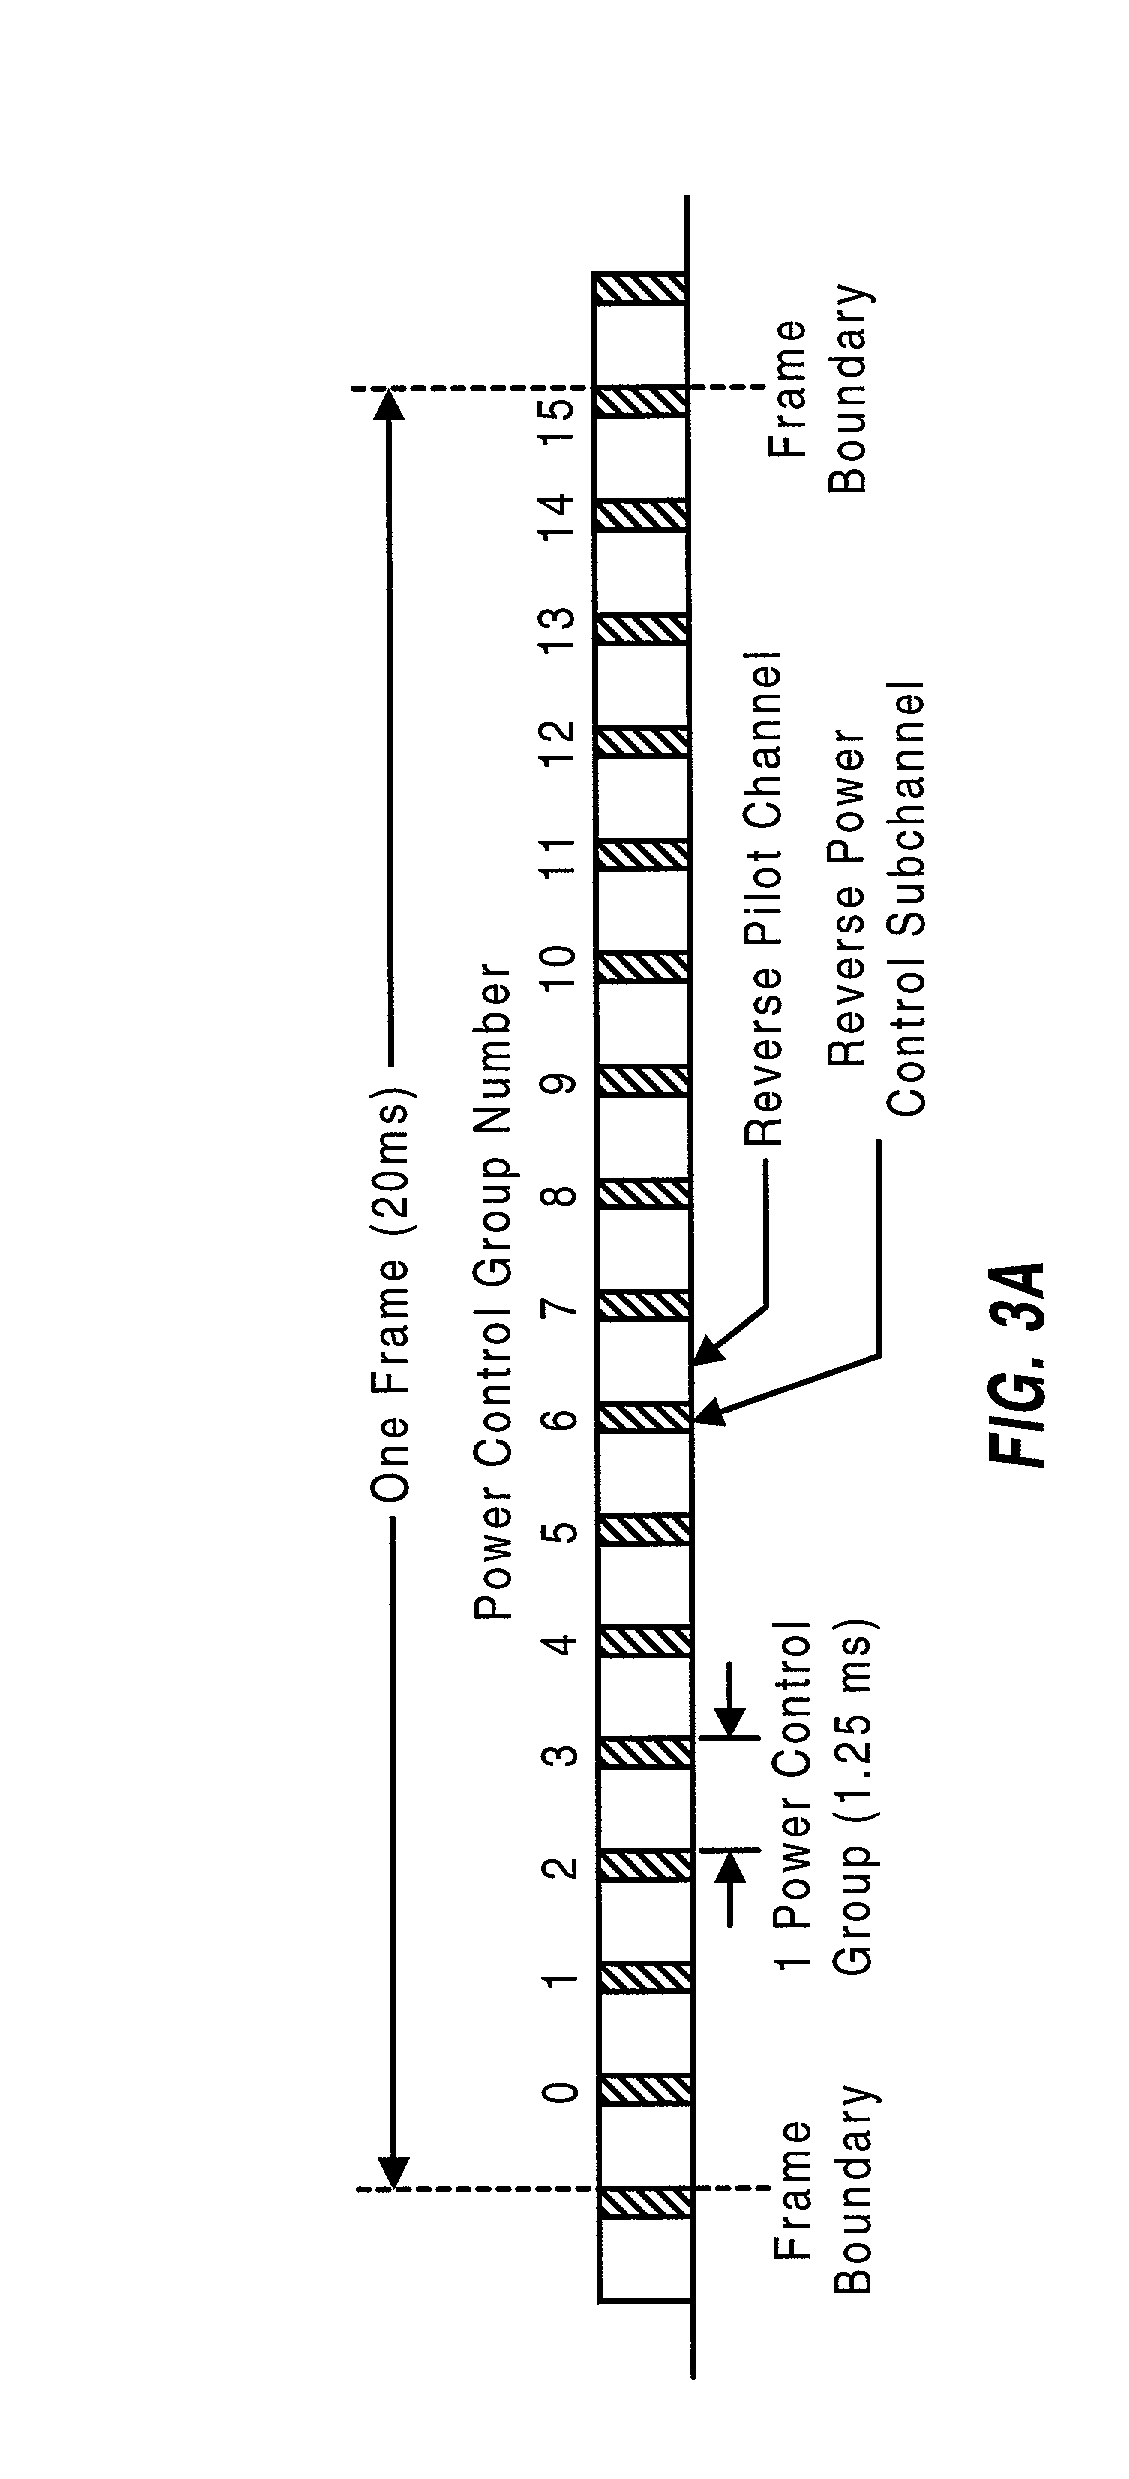 Method and apparatus for power control of multiple channels in a wireless communication system